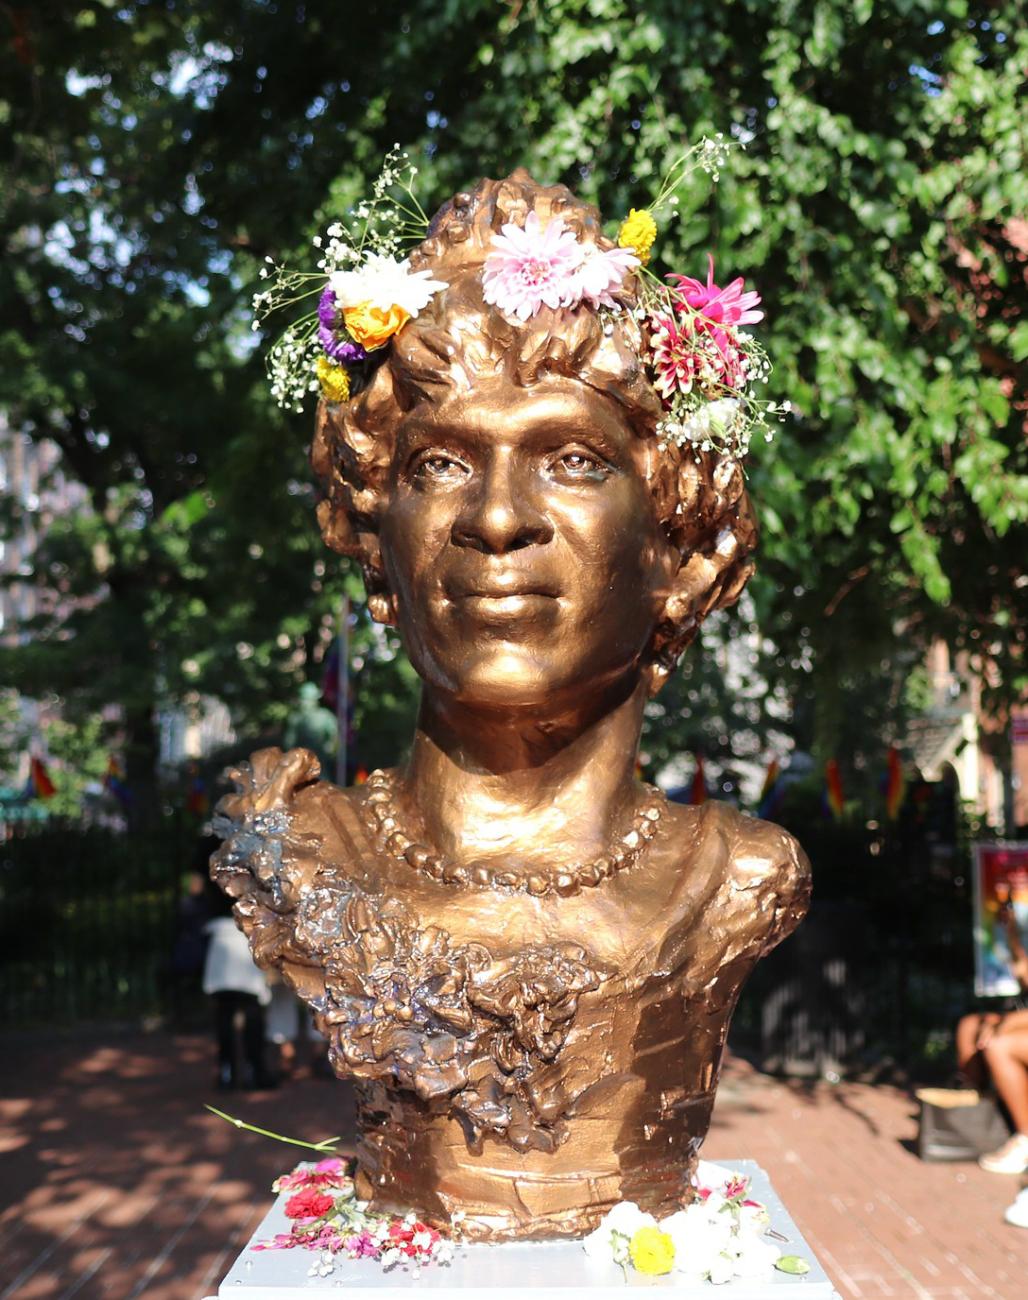 A bronze bust of transgender activist and icon Marsha P. Johnson in Christopher Park in Manhattan. Transgender Day of Visibility.